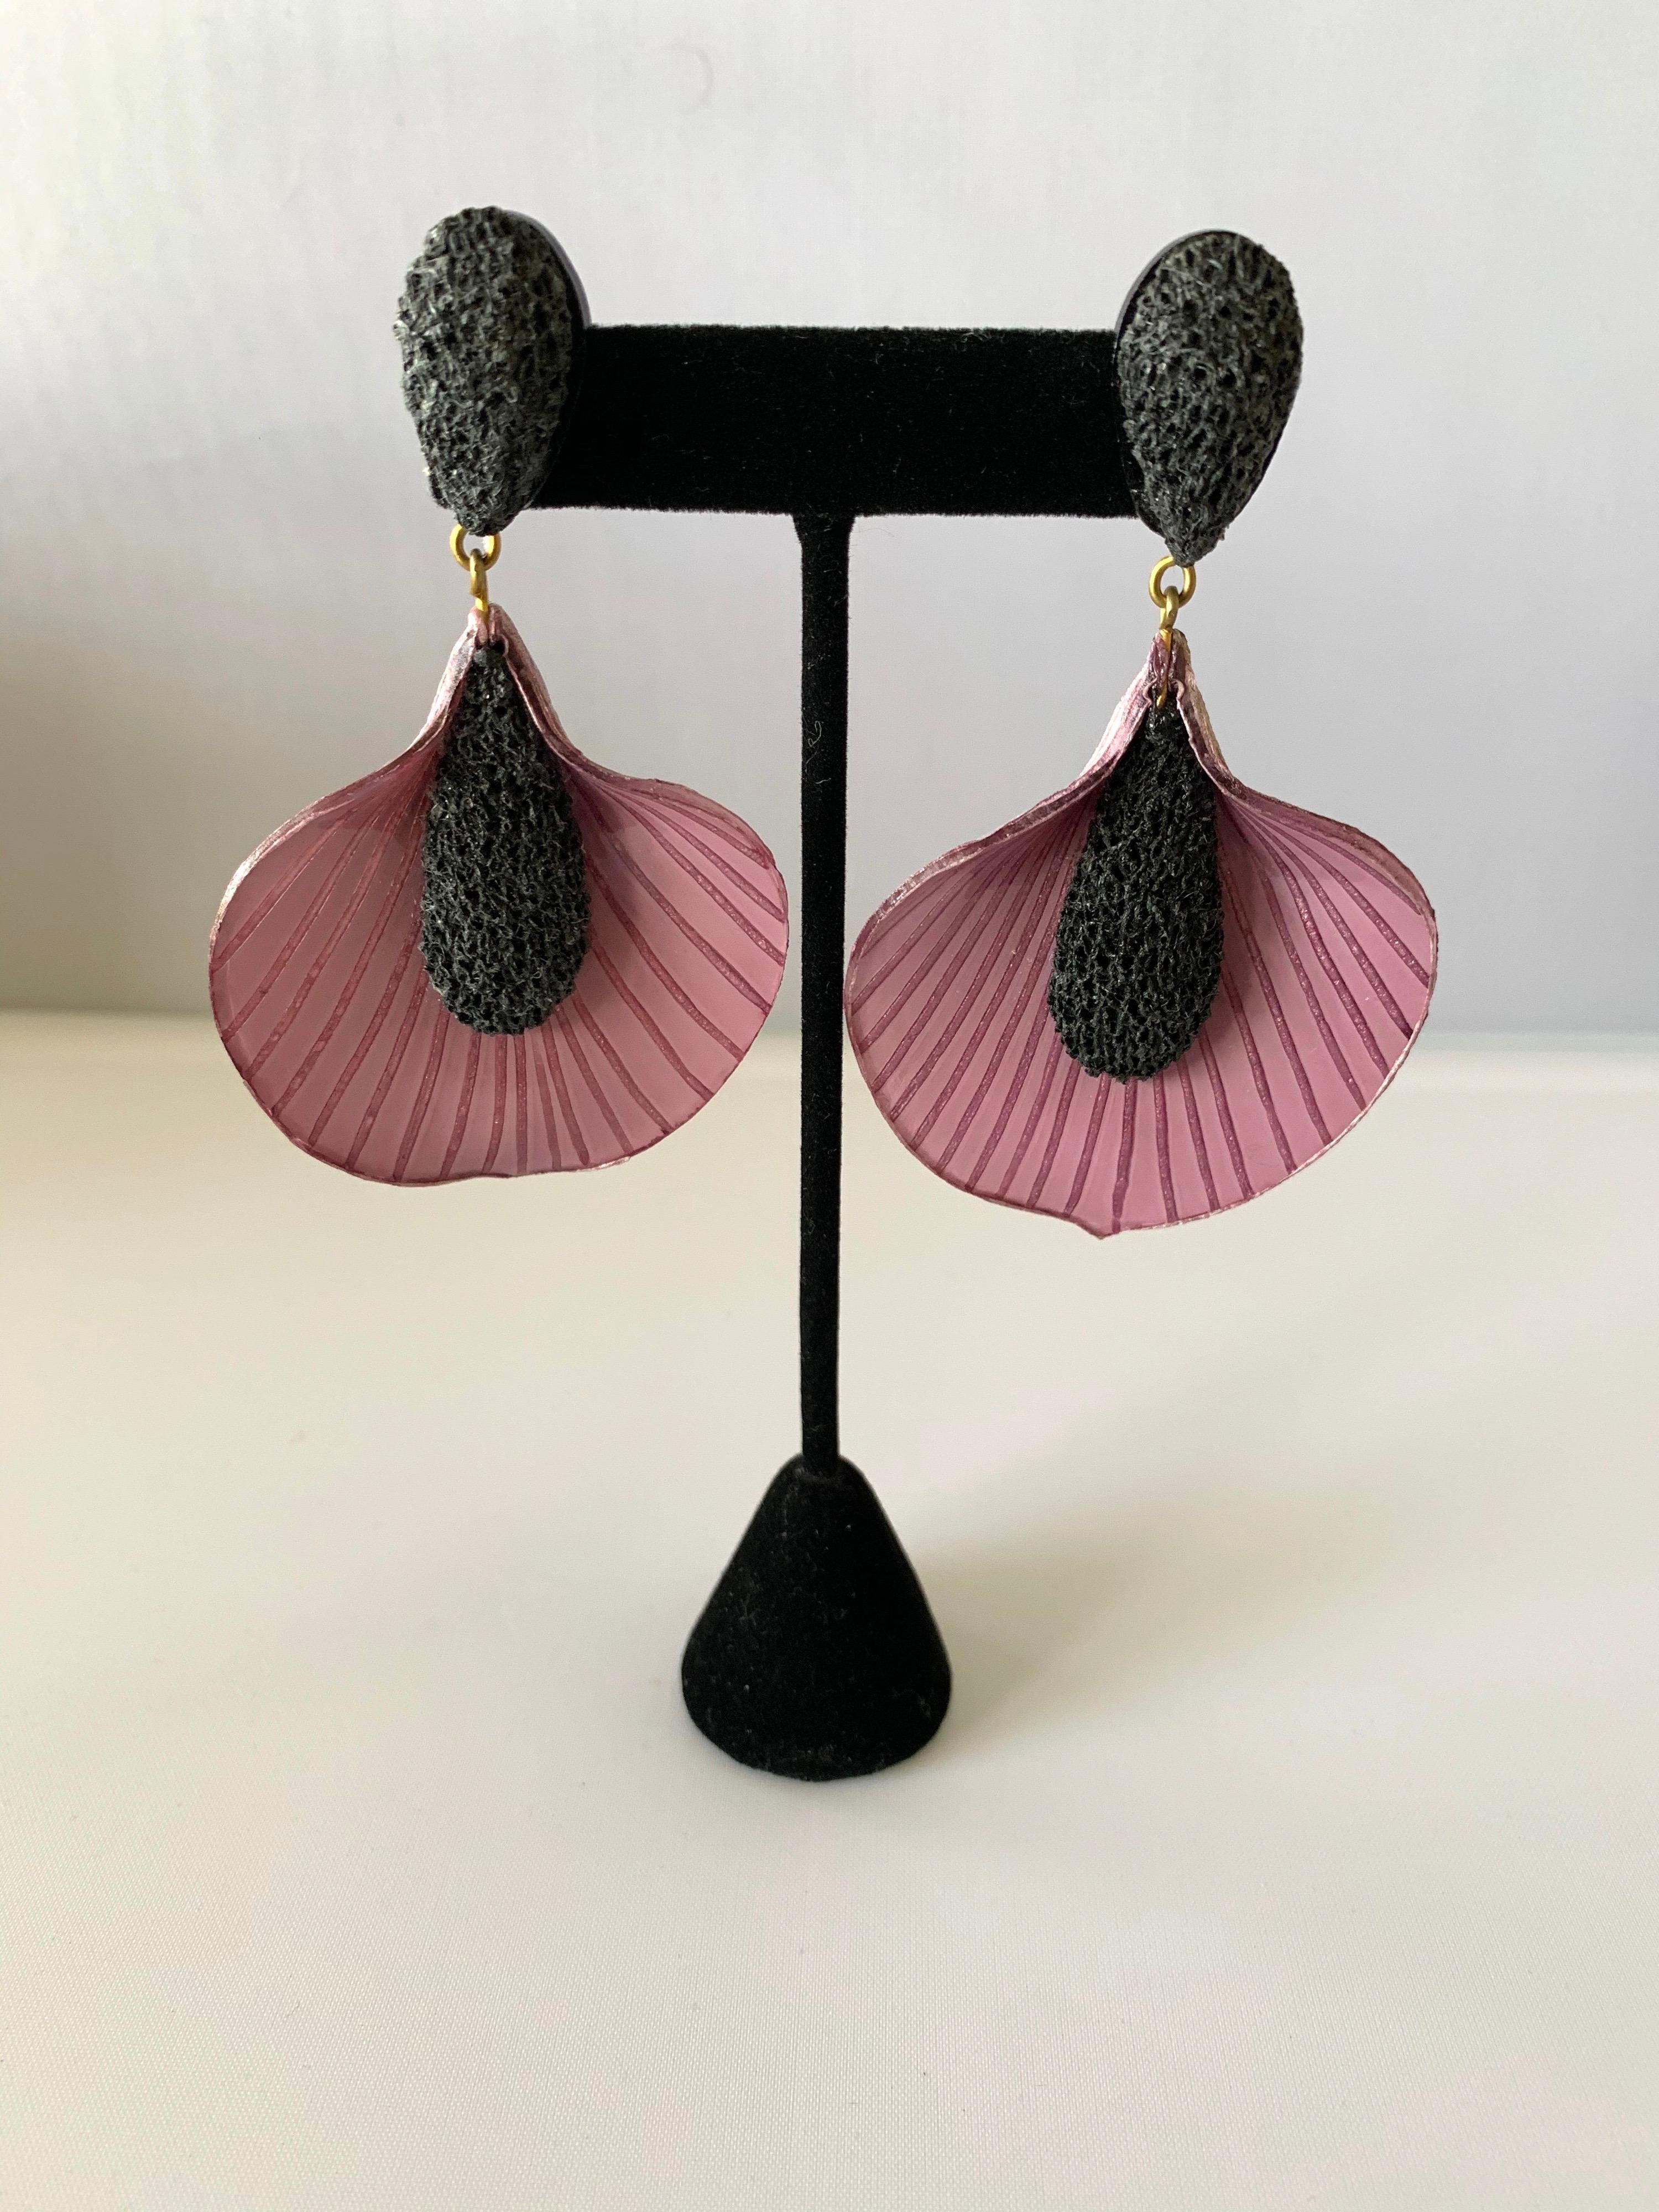 Three-dimensional, artisanal statement earrings by Cilea Paris. The contemporary enamel/resin earrings feature a dramatic yet simple design, showcasing oversized lily flowers - the combination of the two colors and texture gives the earrings dept